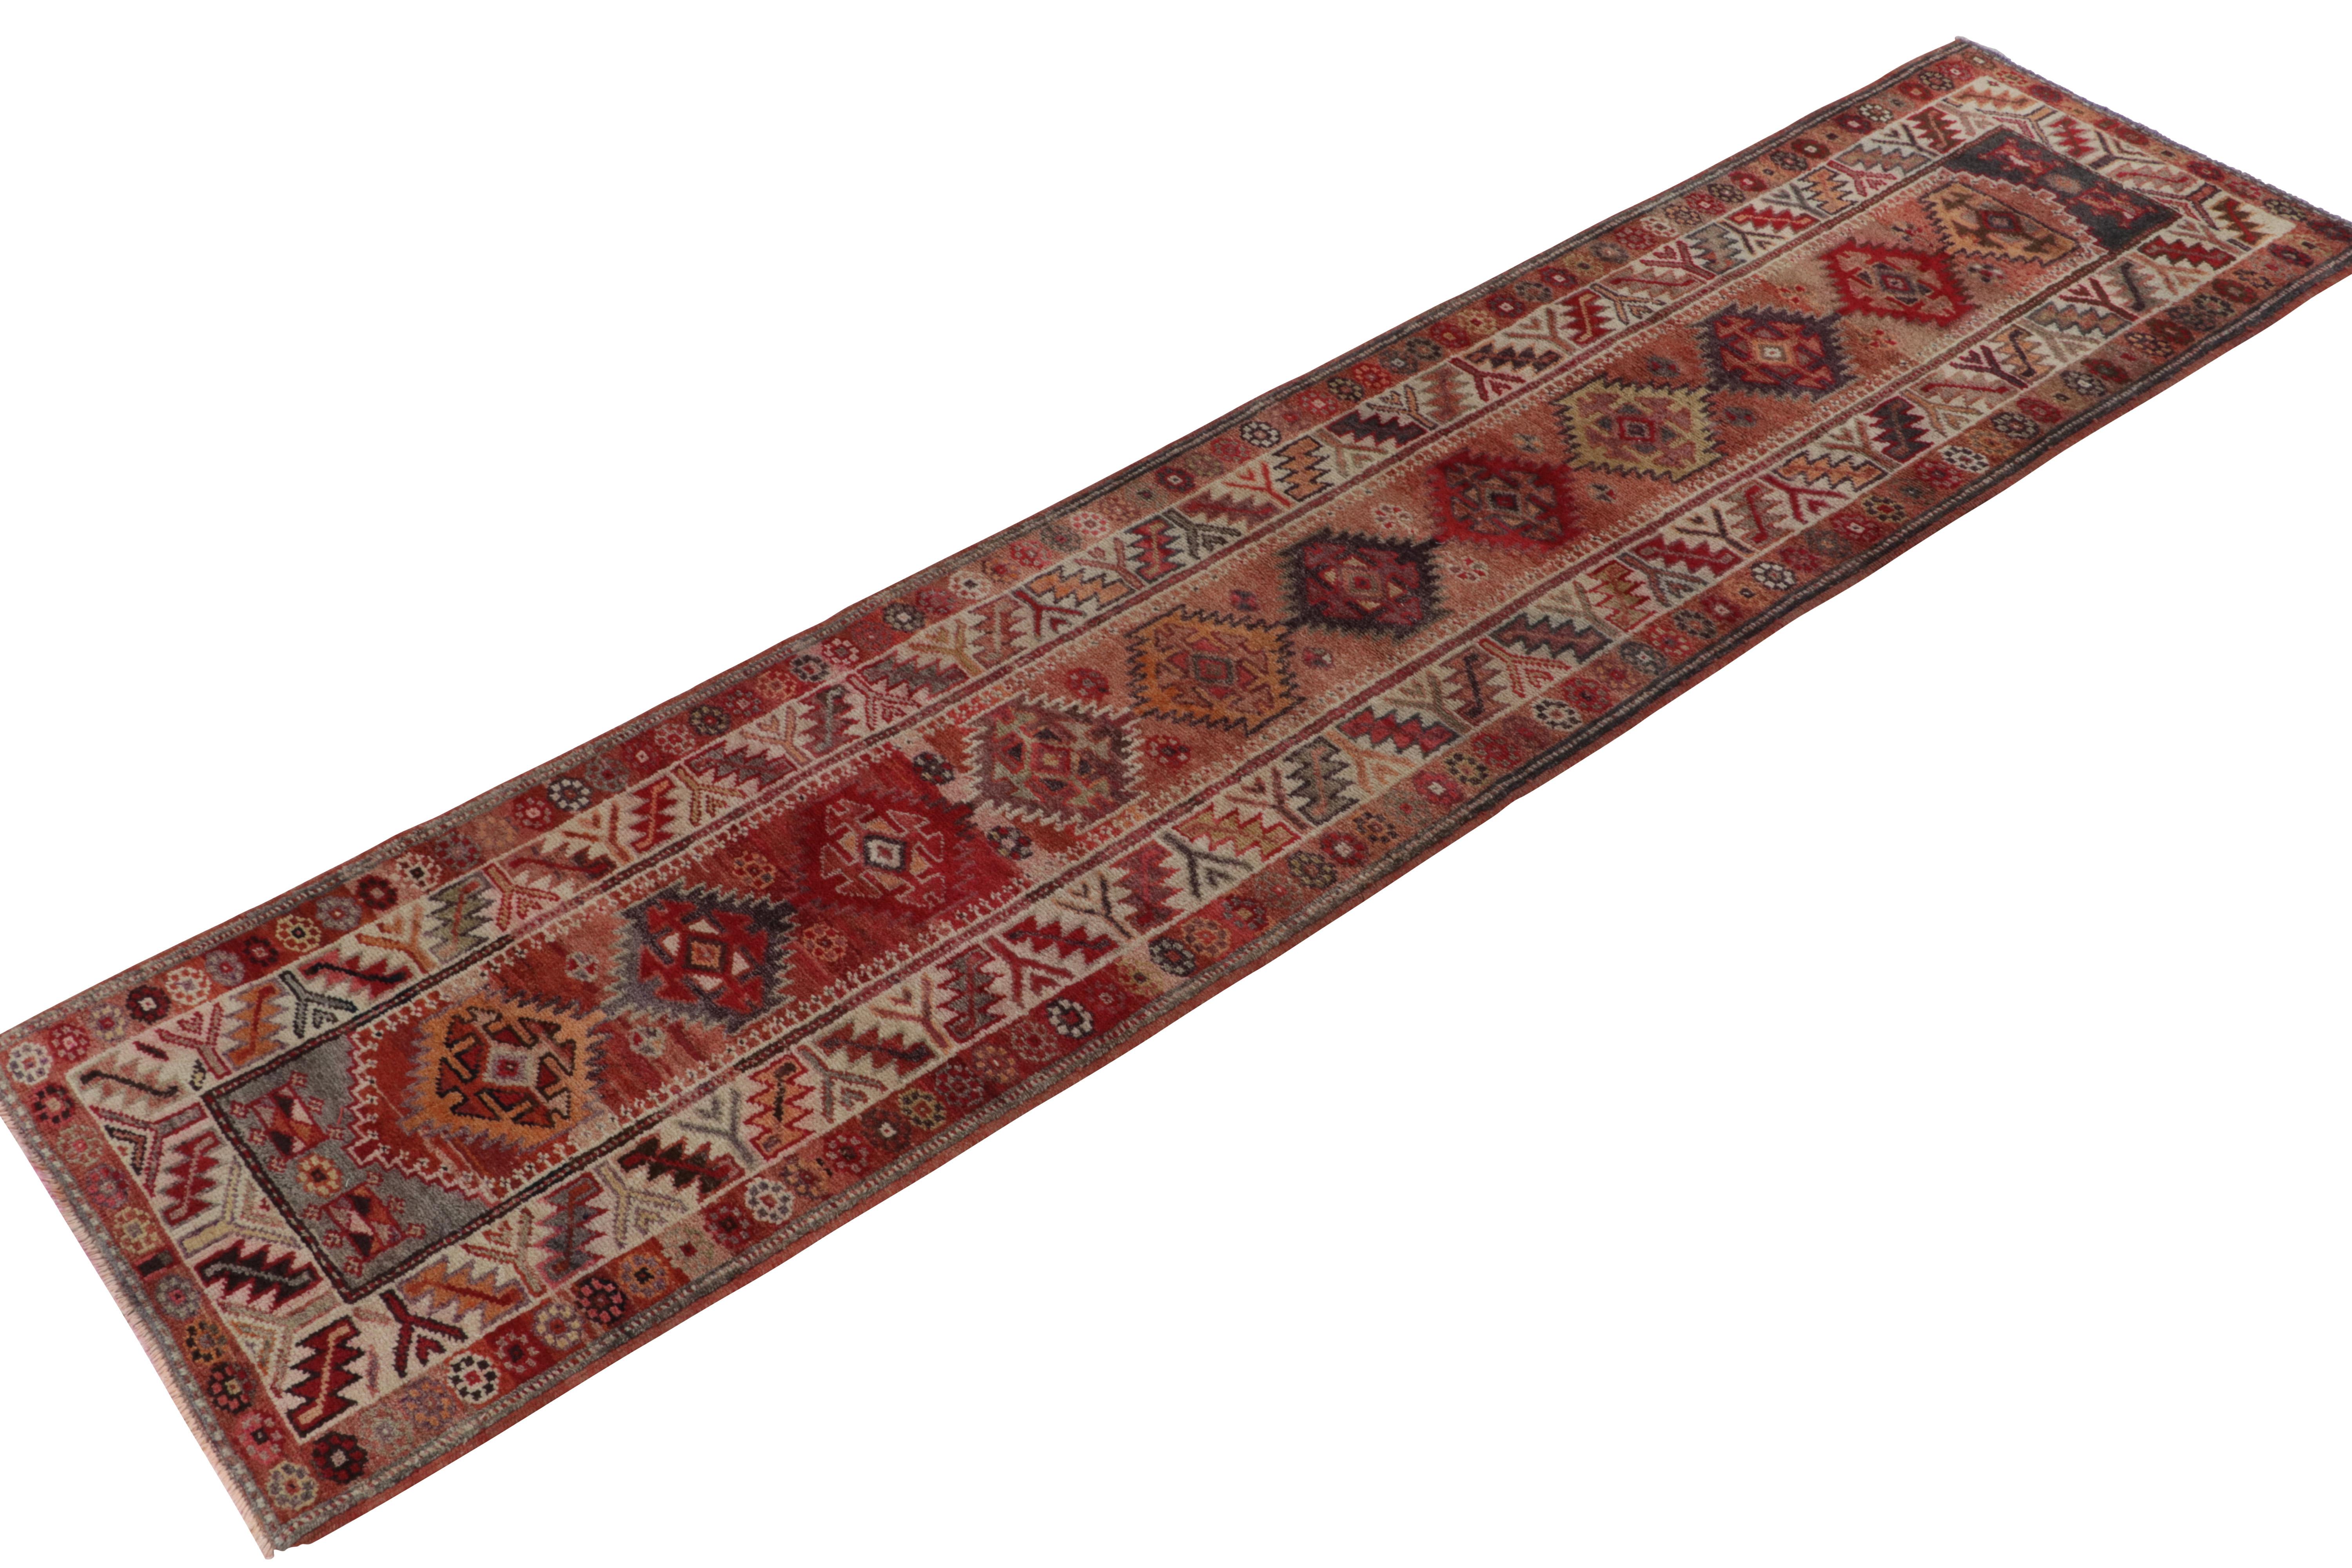 From R&K Principal Josh Nazmiyal’s latest acquisitions, a distinct vintage runner originating from Turkey circa 1950-1960. 

On the design: The symmetric geometric design features medallions and tribal motifs with a gorgeous movement in red and